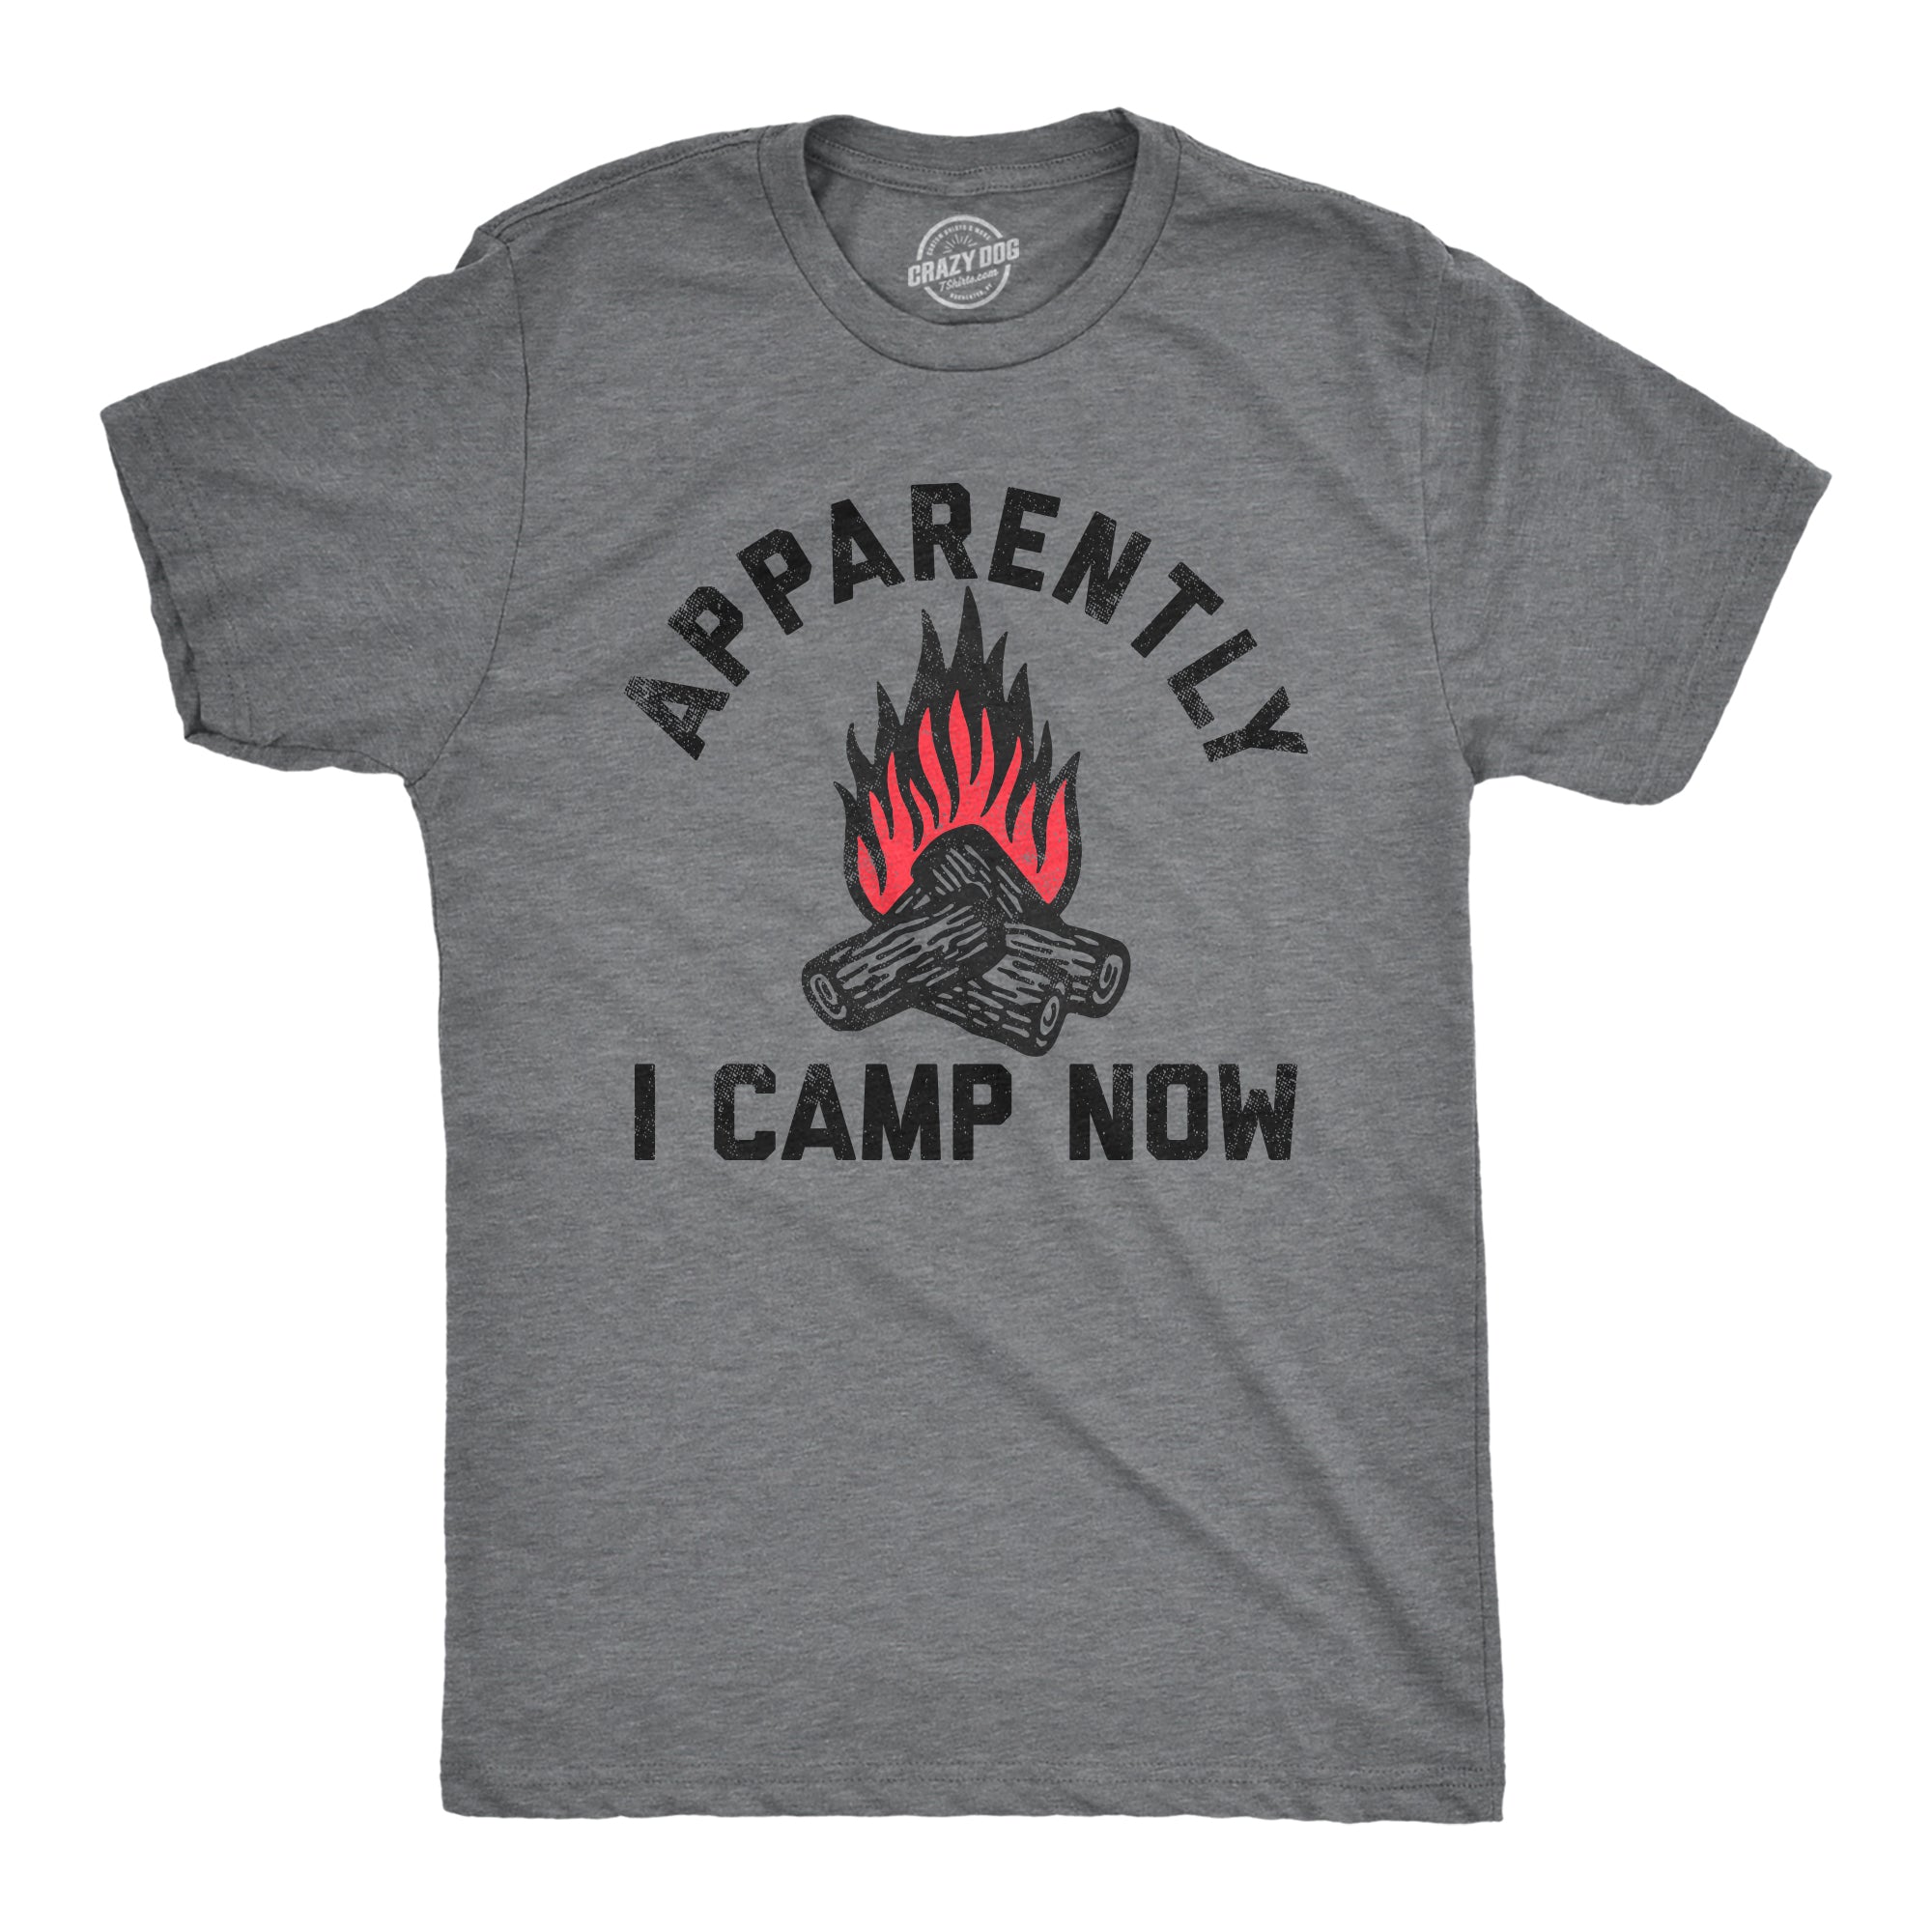 Funny Dark Heather Grey - Camp Now Apparently I Camp Now Mens T Shirt Nerdy Camping sarcastic Tee